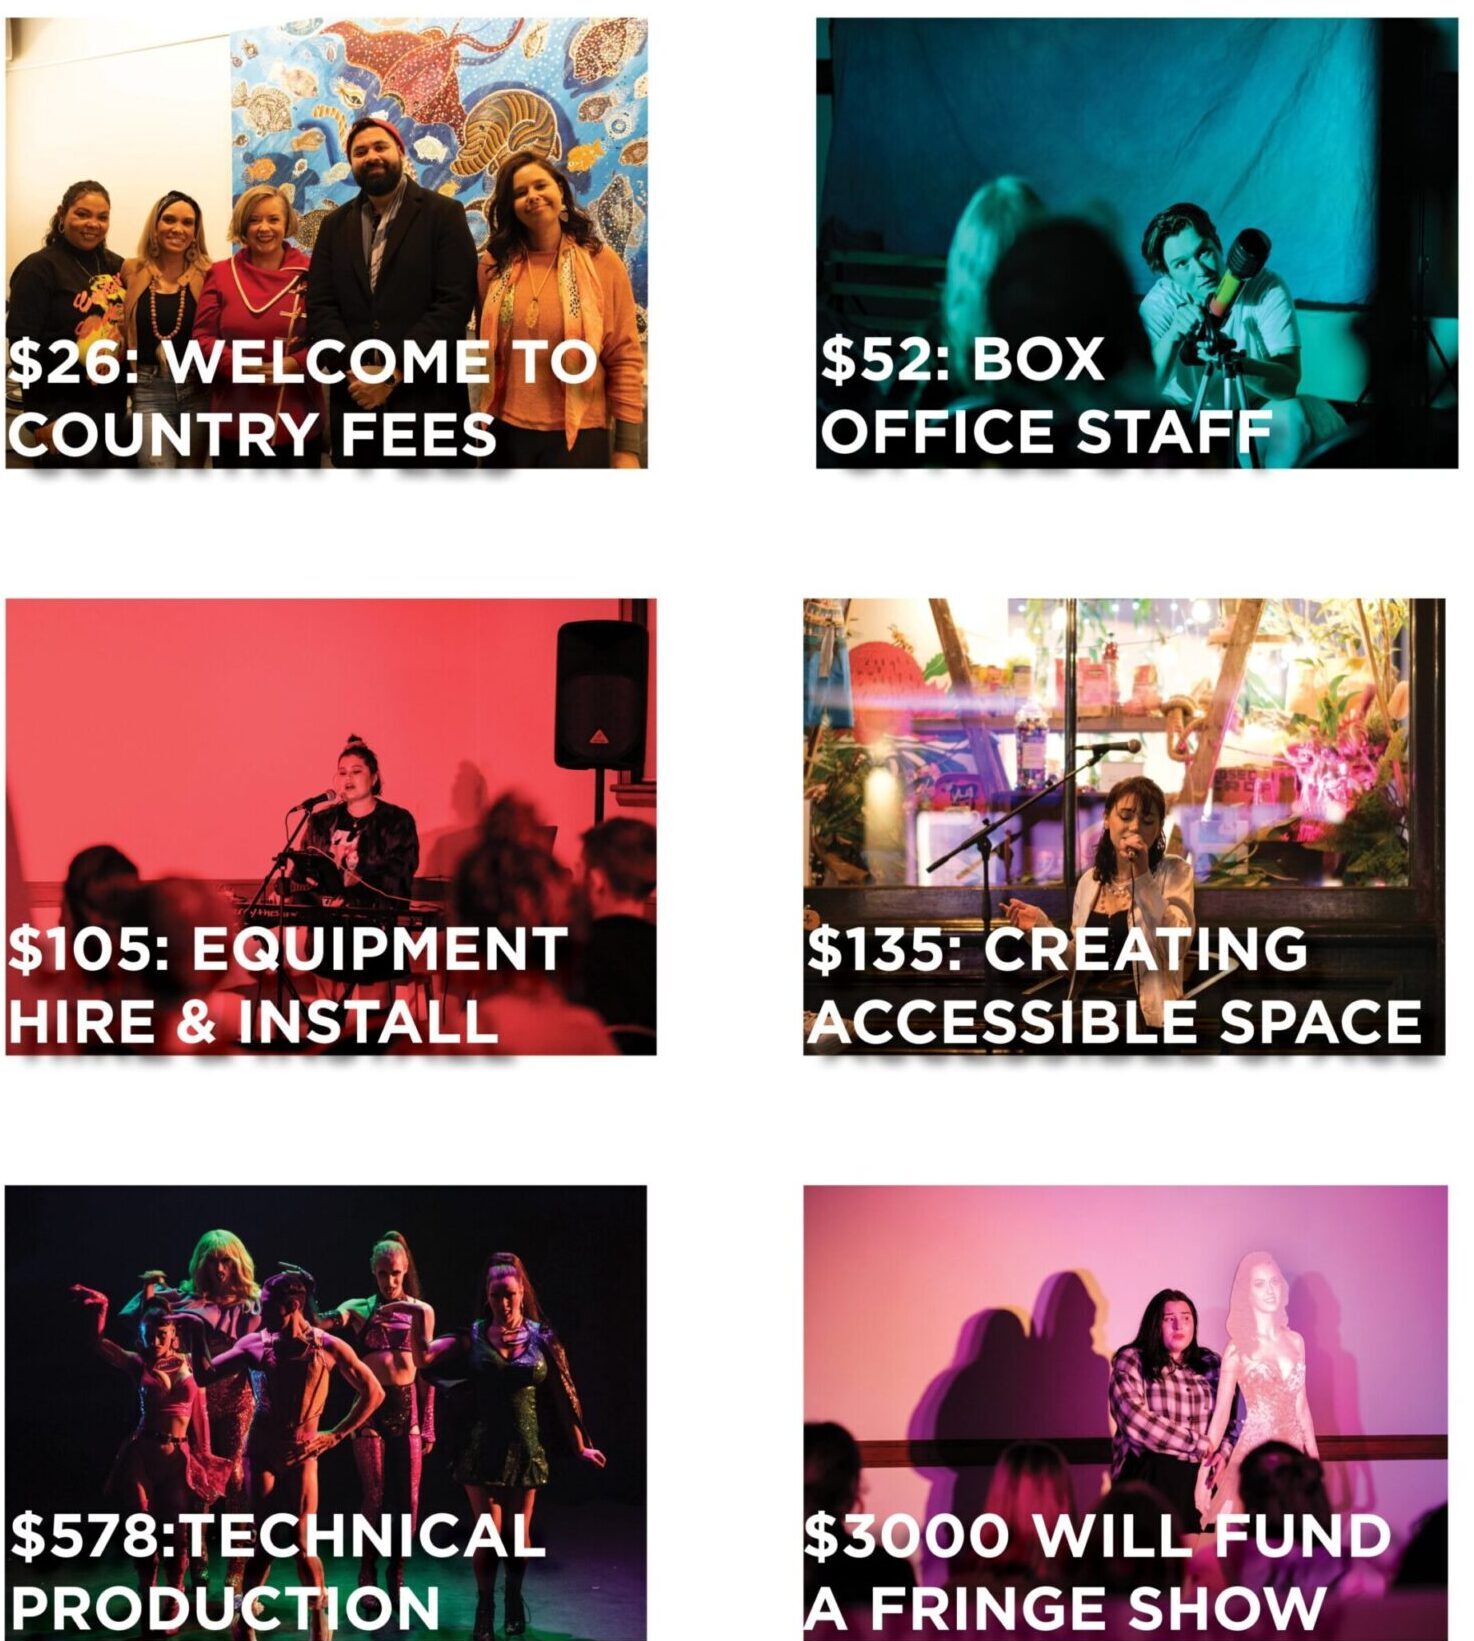 a six image gallery displaying different images of performers and text. 